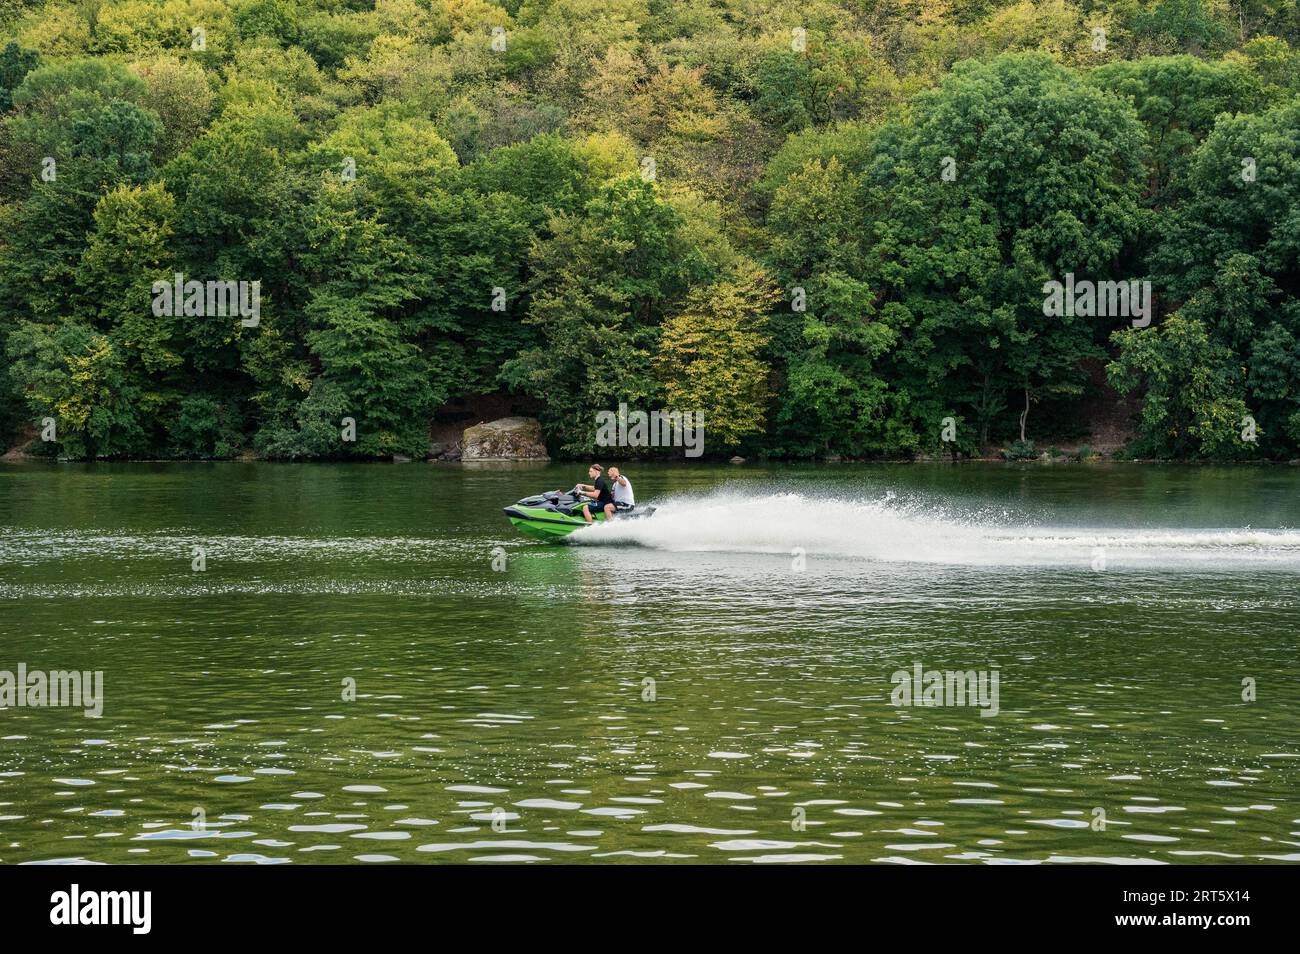 Two people riding jet ski watercraft on river with beautiful green trees background. Speed, sport, vacation, extreme Stock Photo